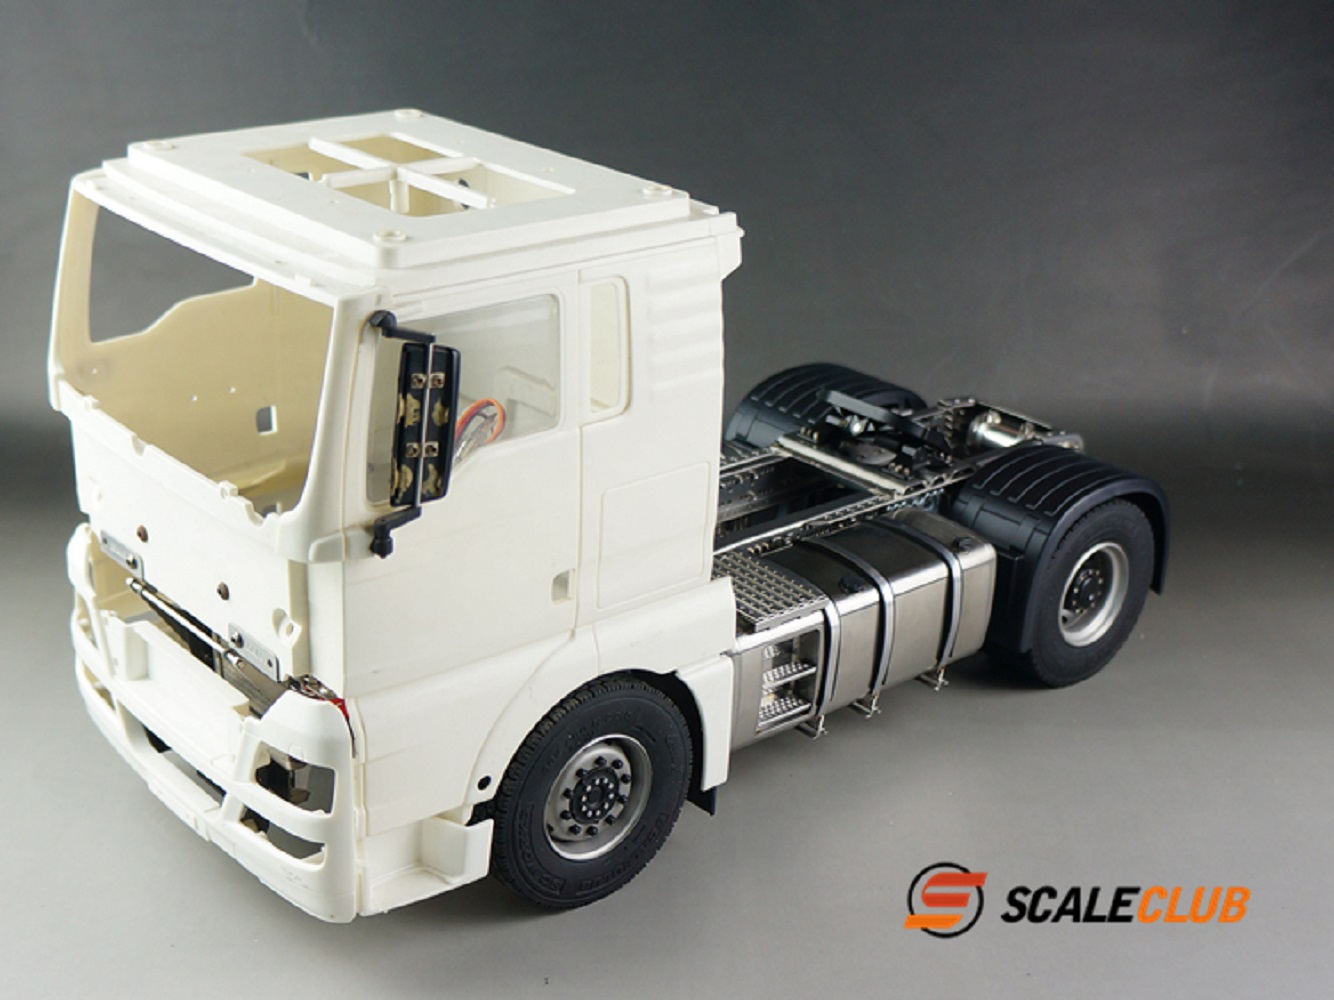 ScateClub Model 1/14 -For Tamiya Man Full Metal 4x4 4x2 Chassis For Lesu Scania Actros Volvo Car Parts RC Truck Trailer